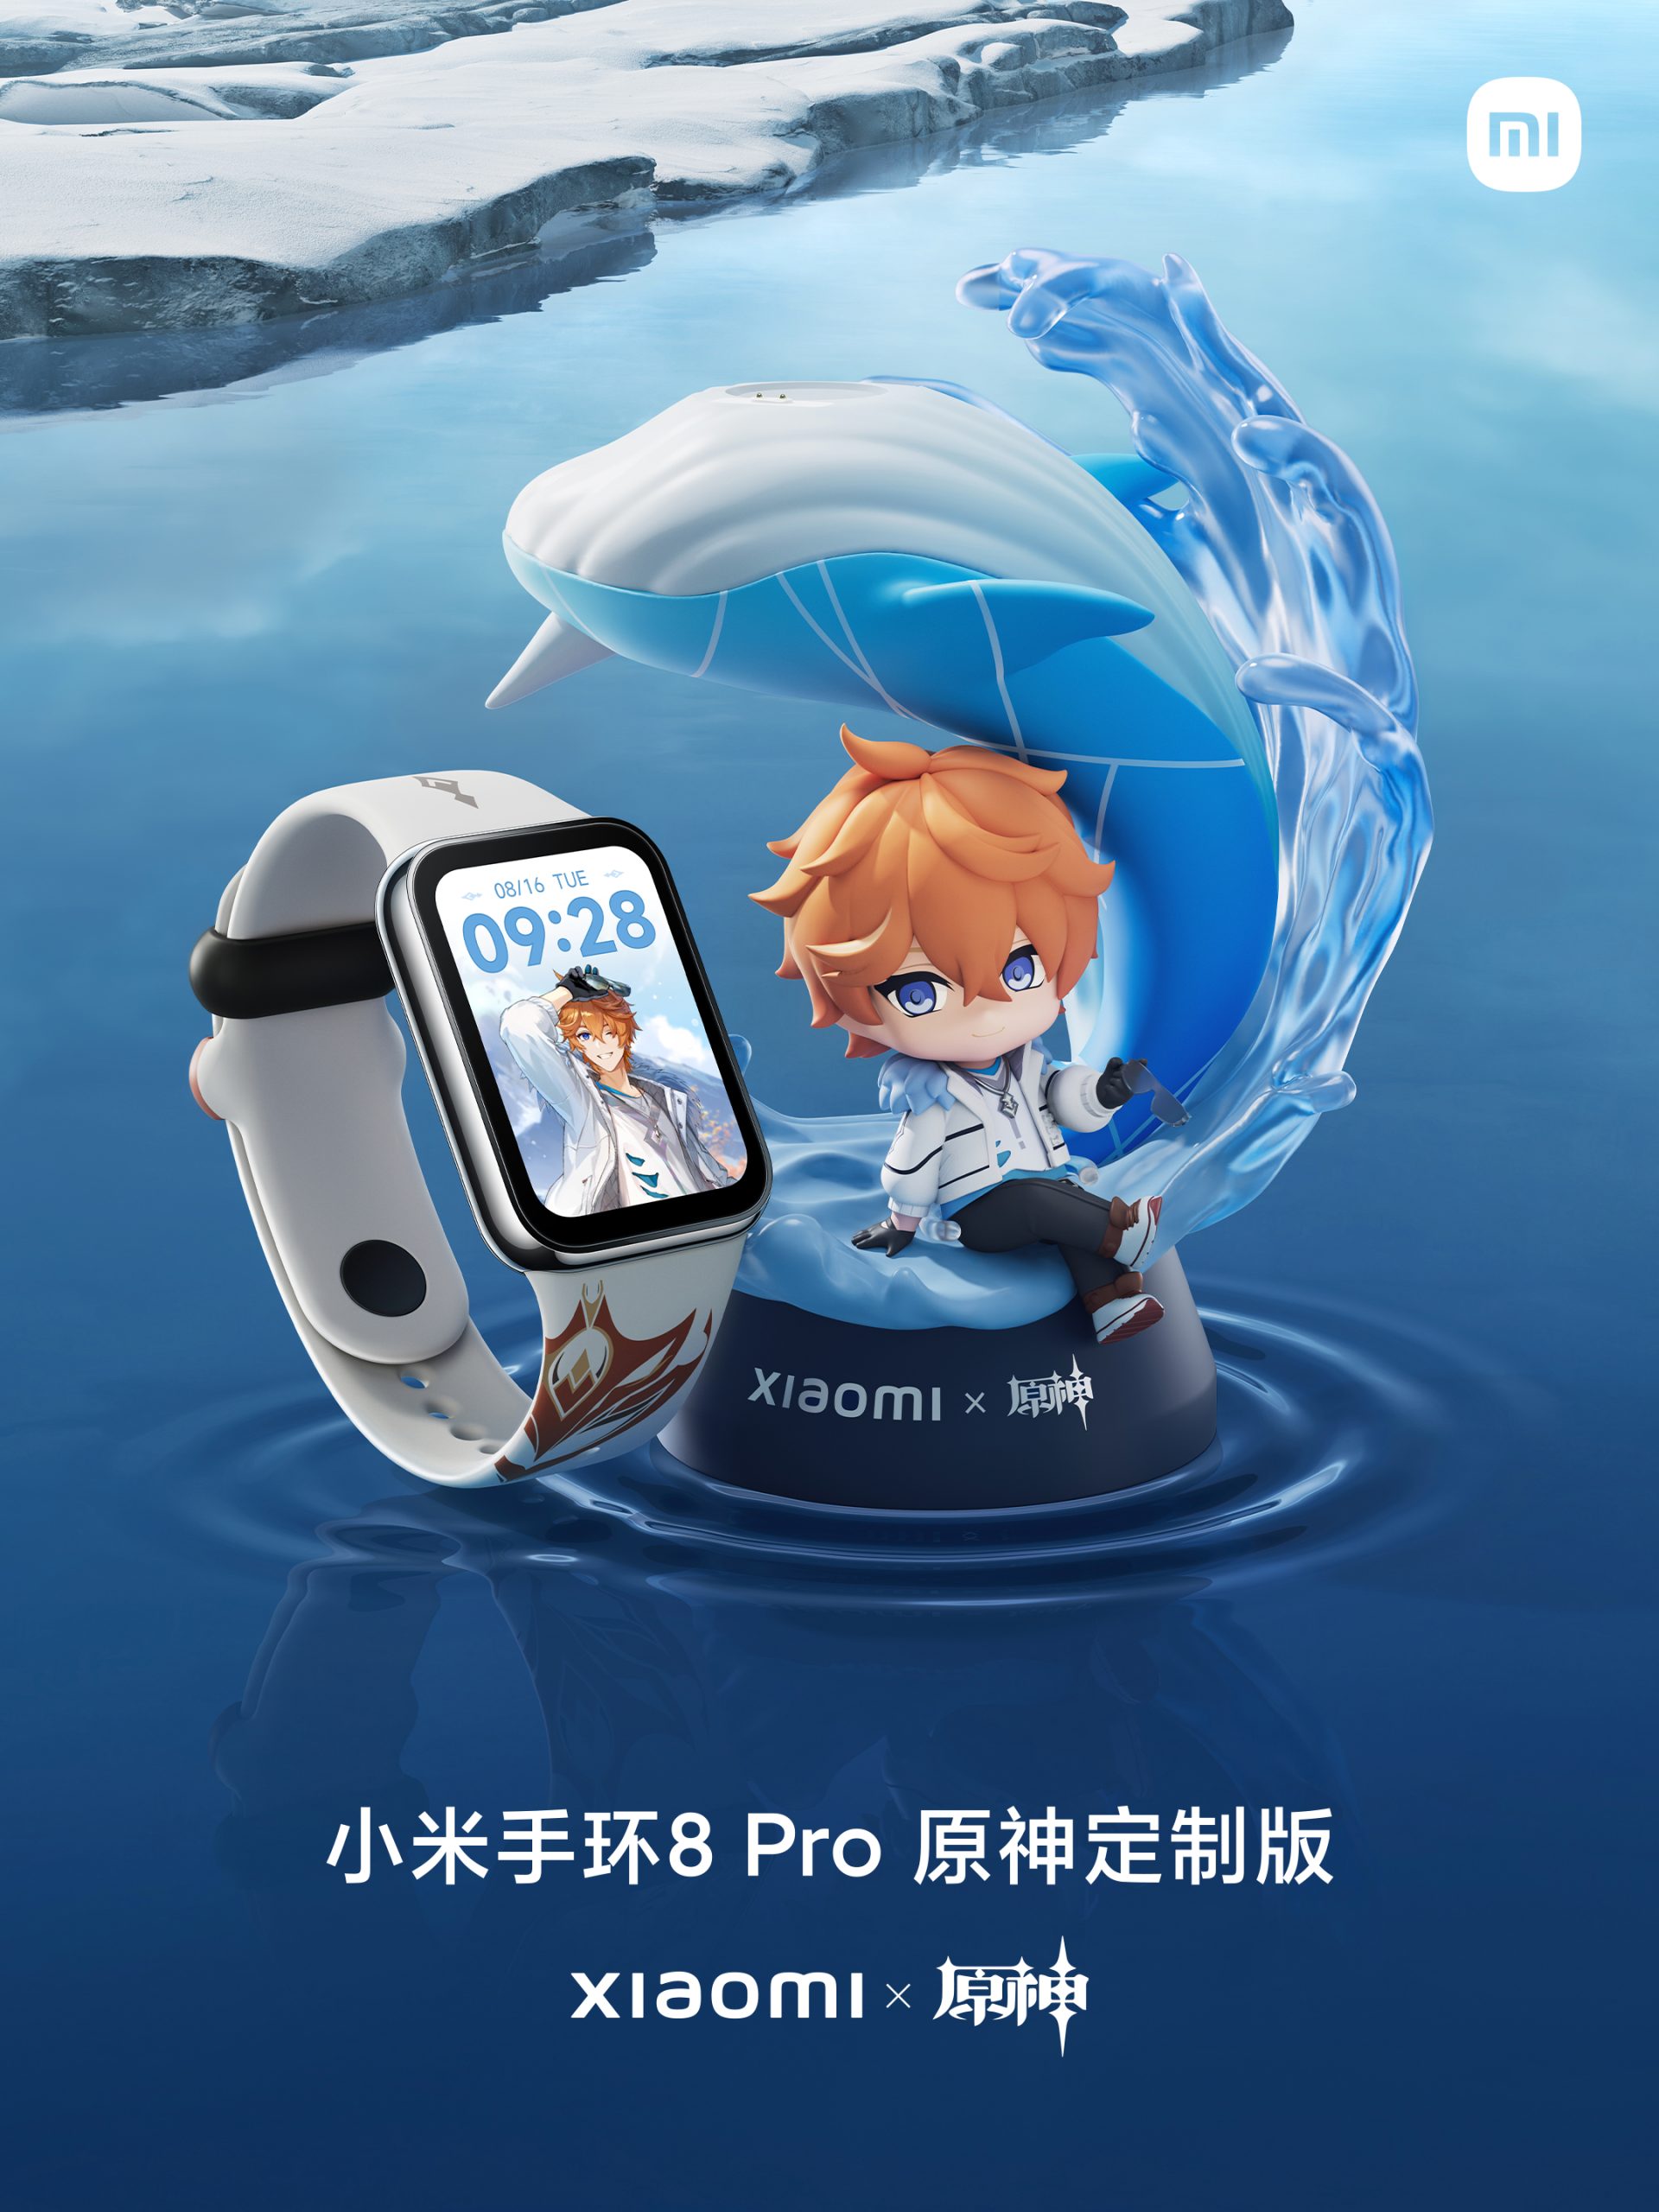 Xiaomi Band 8 Pro Genshin Impact special edition launches in China ·  TechNode